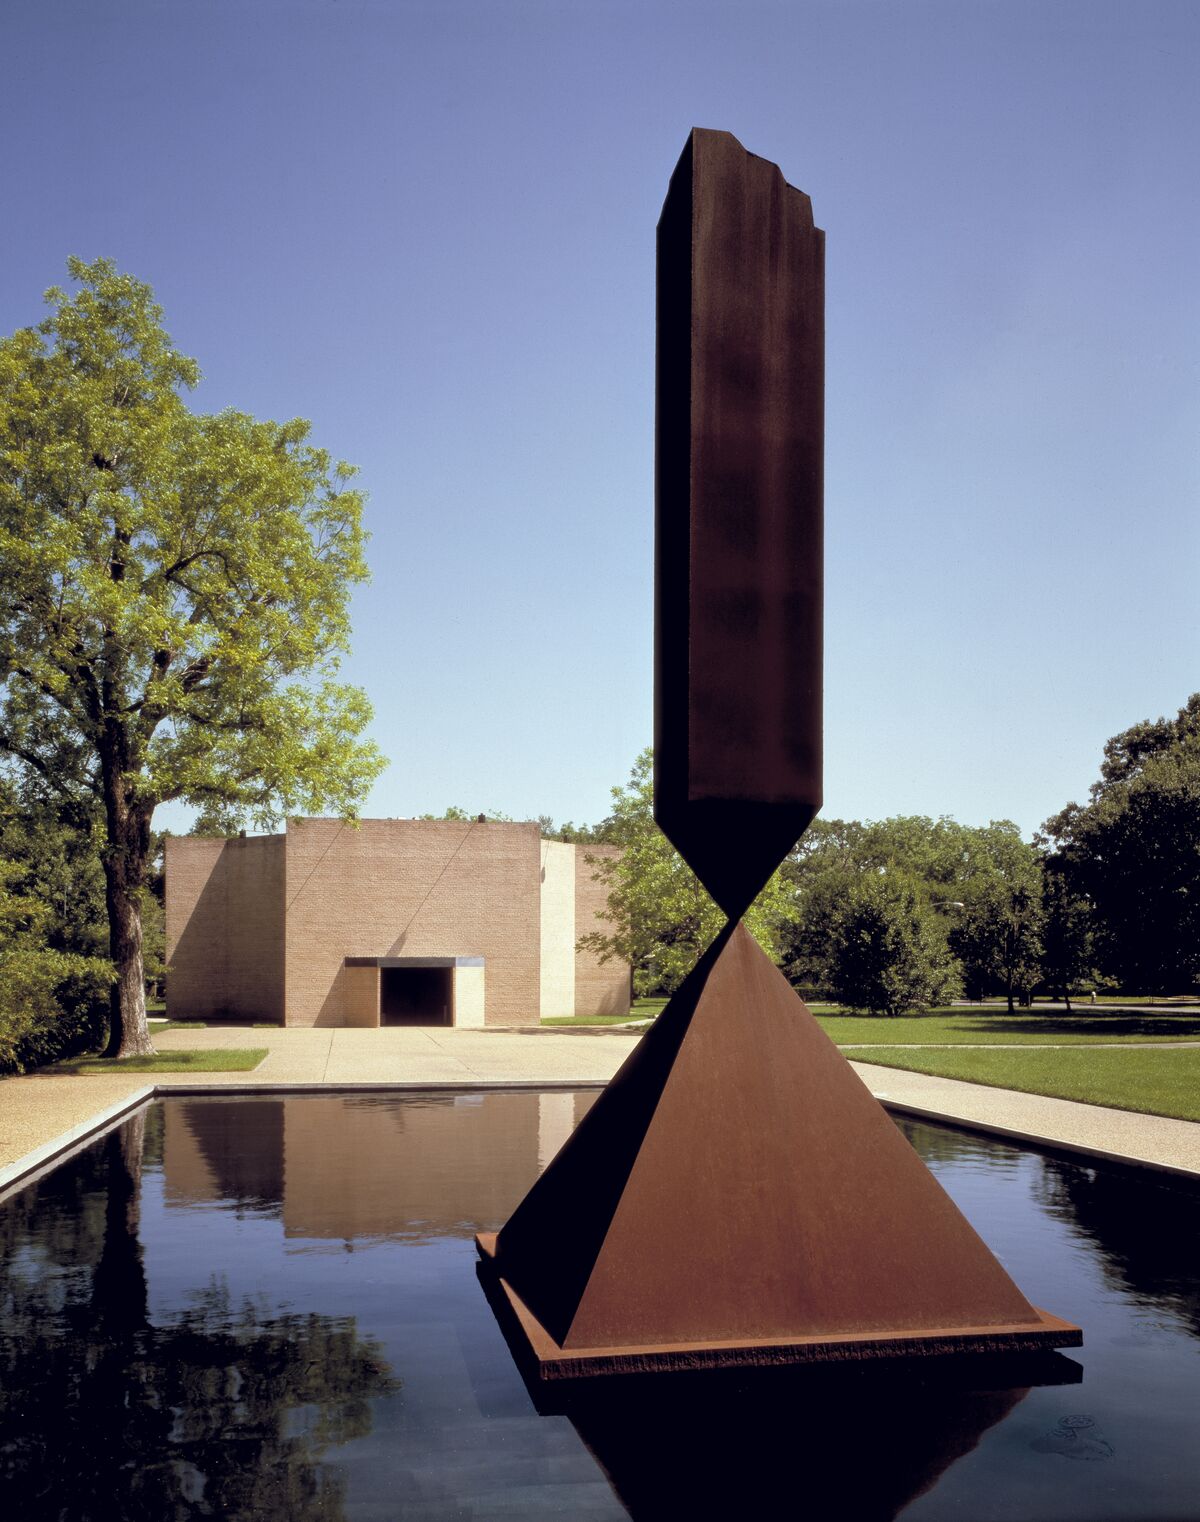 Barnett Newman, Broken Obelisk, 1963-1967, dedicated to Martin Luther King, Jr., in front of the Rothko Chapel (1971). Photo by Hickey-Robertson. Courtesy of the Rothko Chapel Archives.